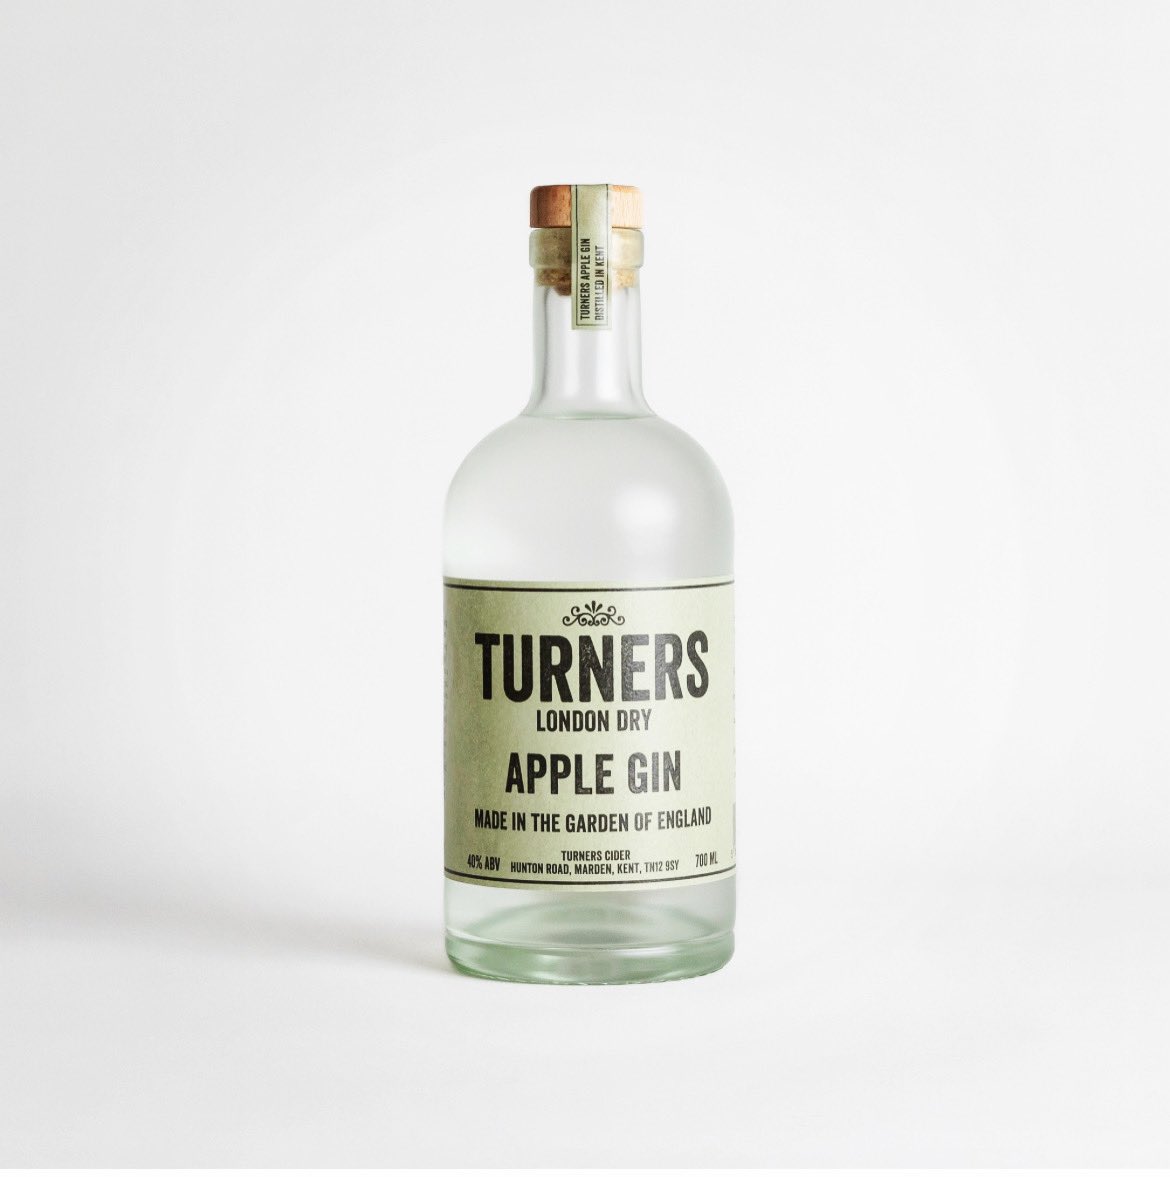 Proud to introduce our brand new product…Turners Apple Gin 🍏🍸 It’s a stunning artisan London dry gin with apple cider botanicals. Aroma and taste of fresh apple. Available now on our webshop link below 👇 #turnersapplegin #artisangin #gin #gintonic turnerscider.co.uk/product/turner…